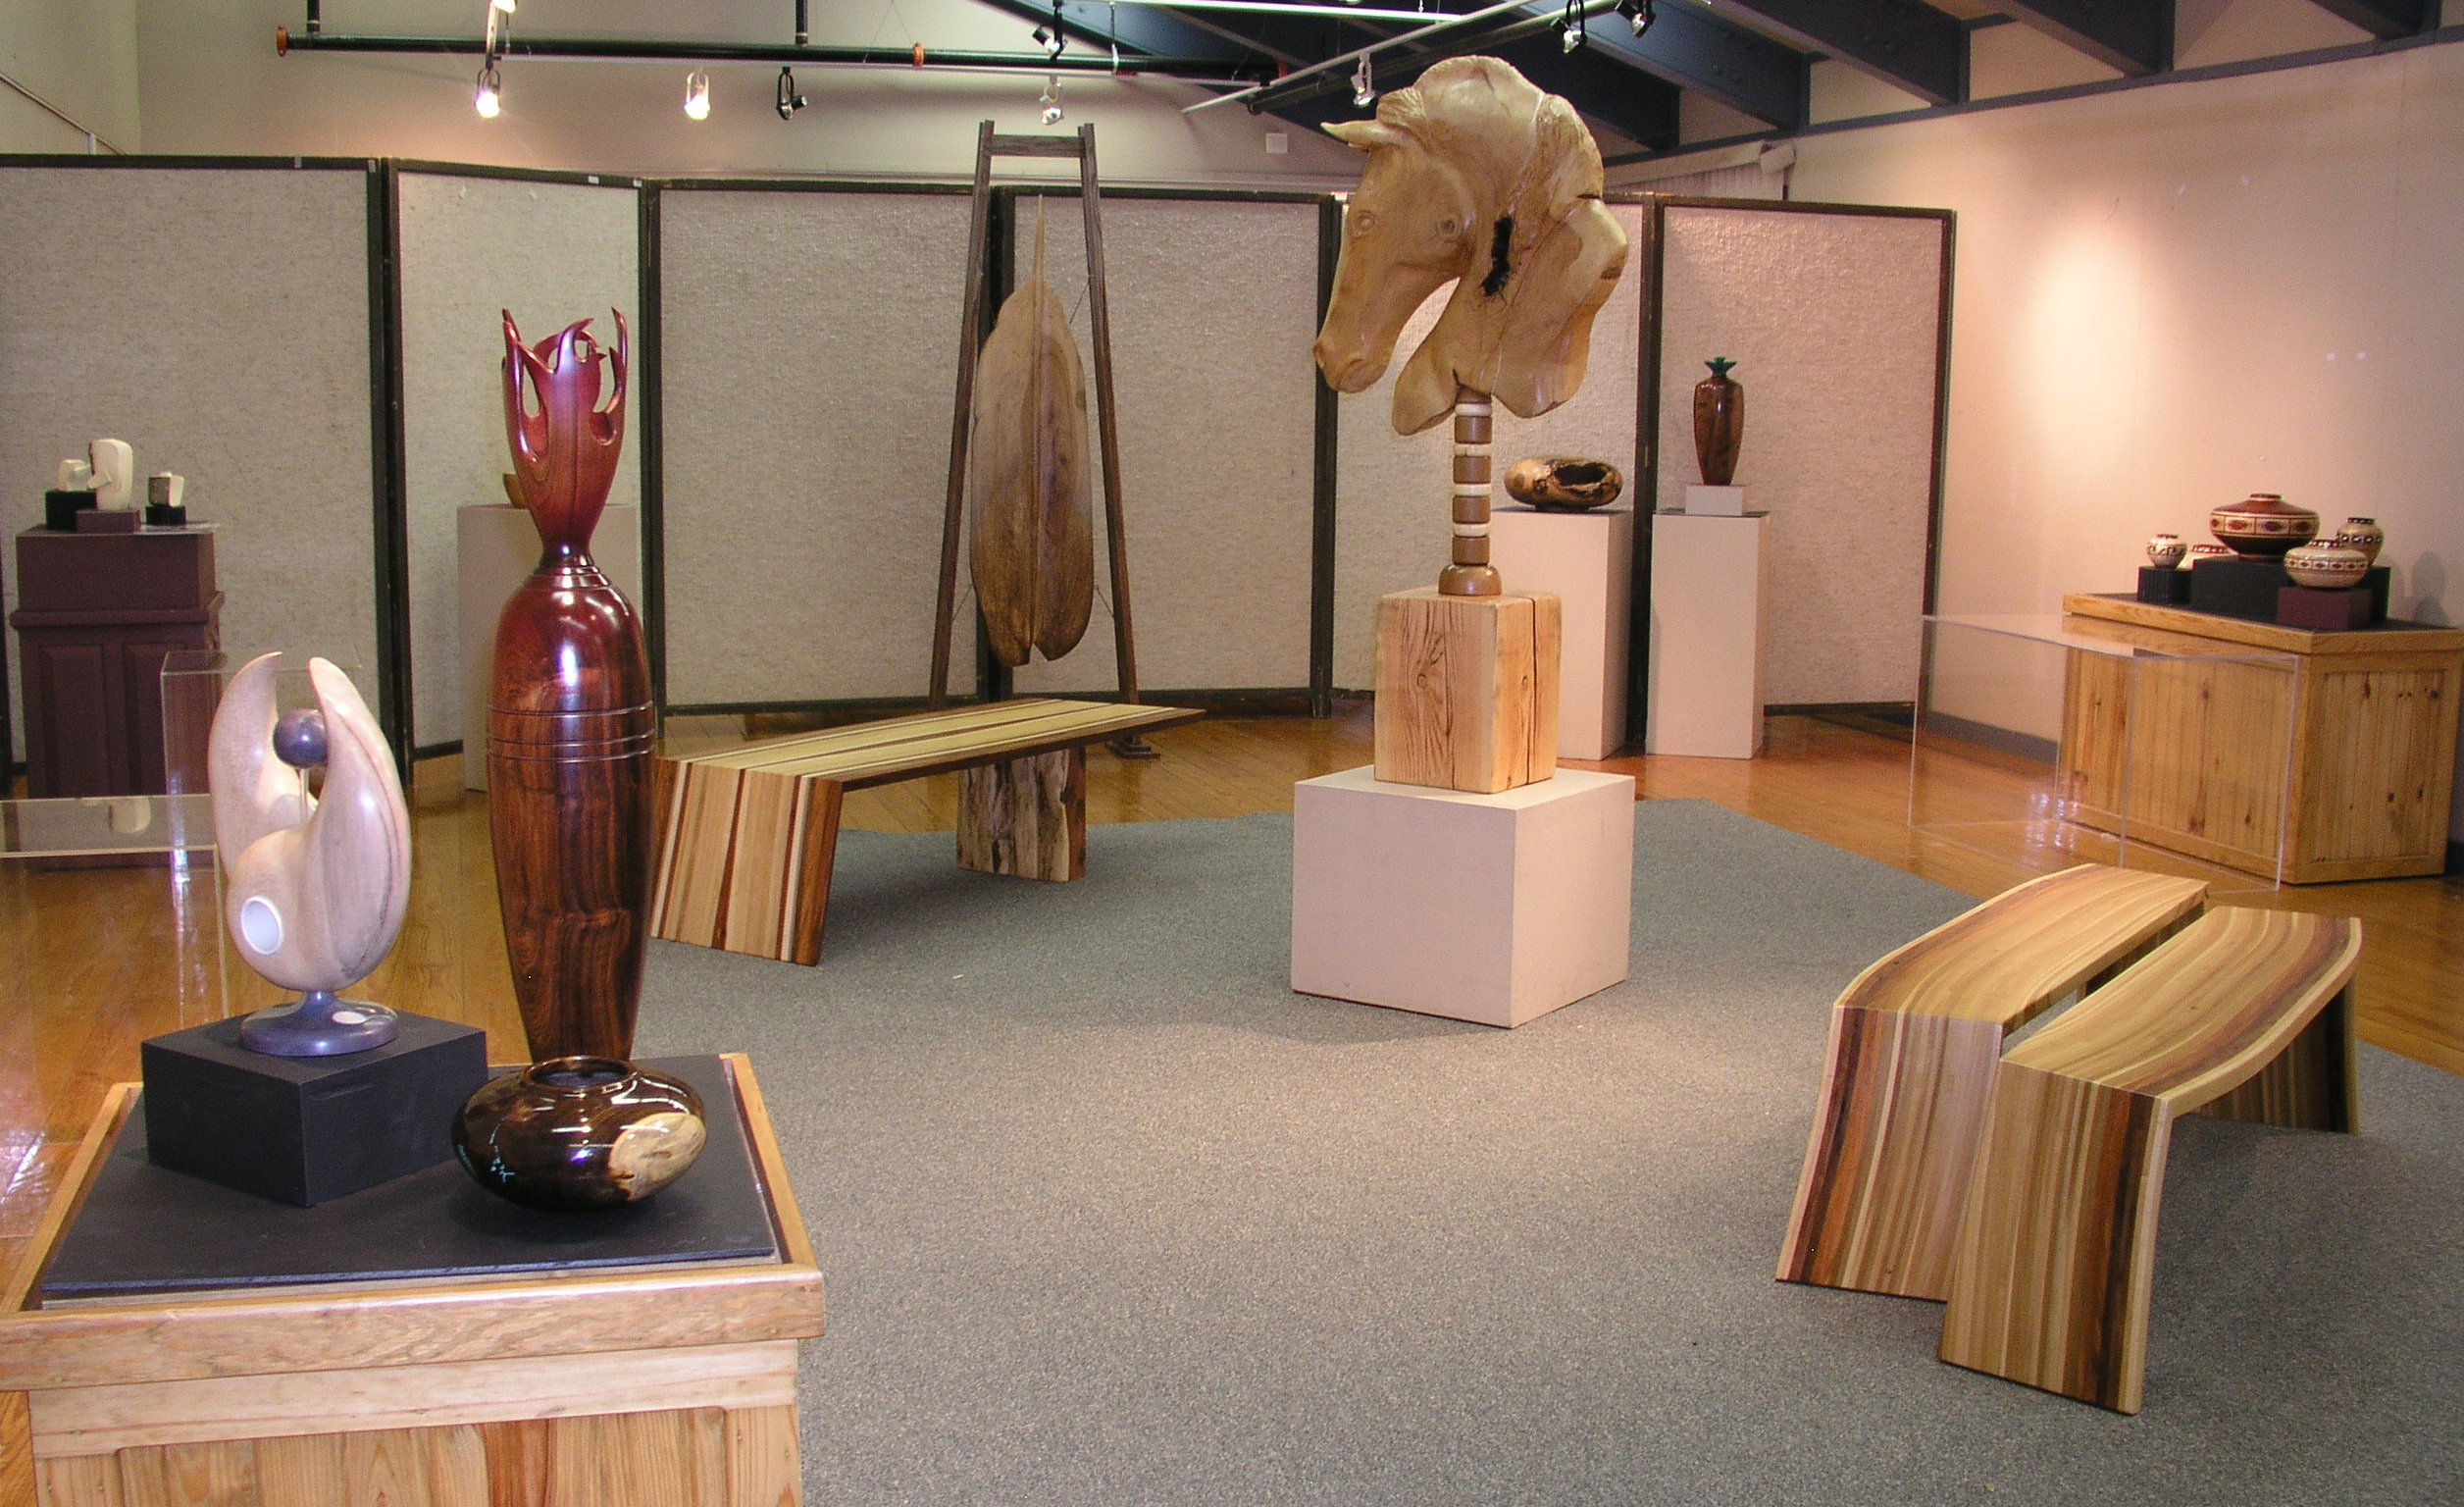 Artist of the year gallery at he Forest Heritage Center Museum